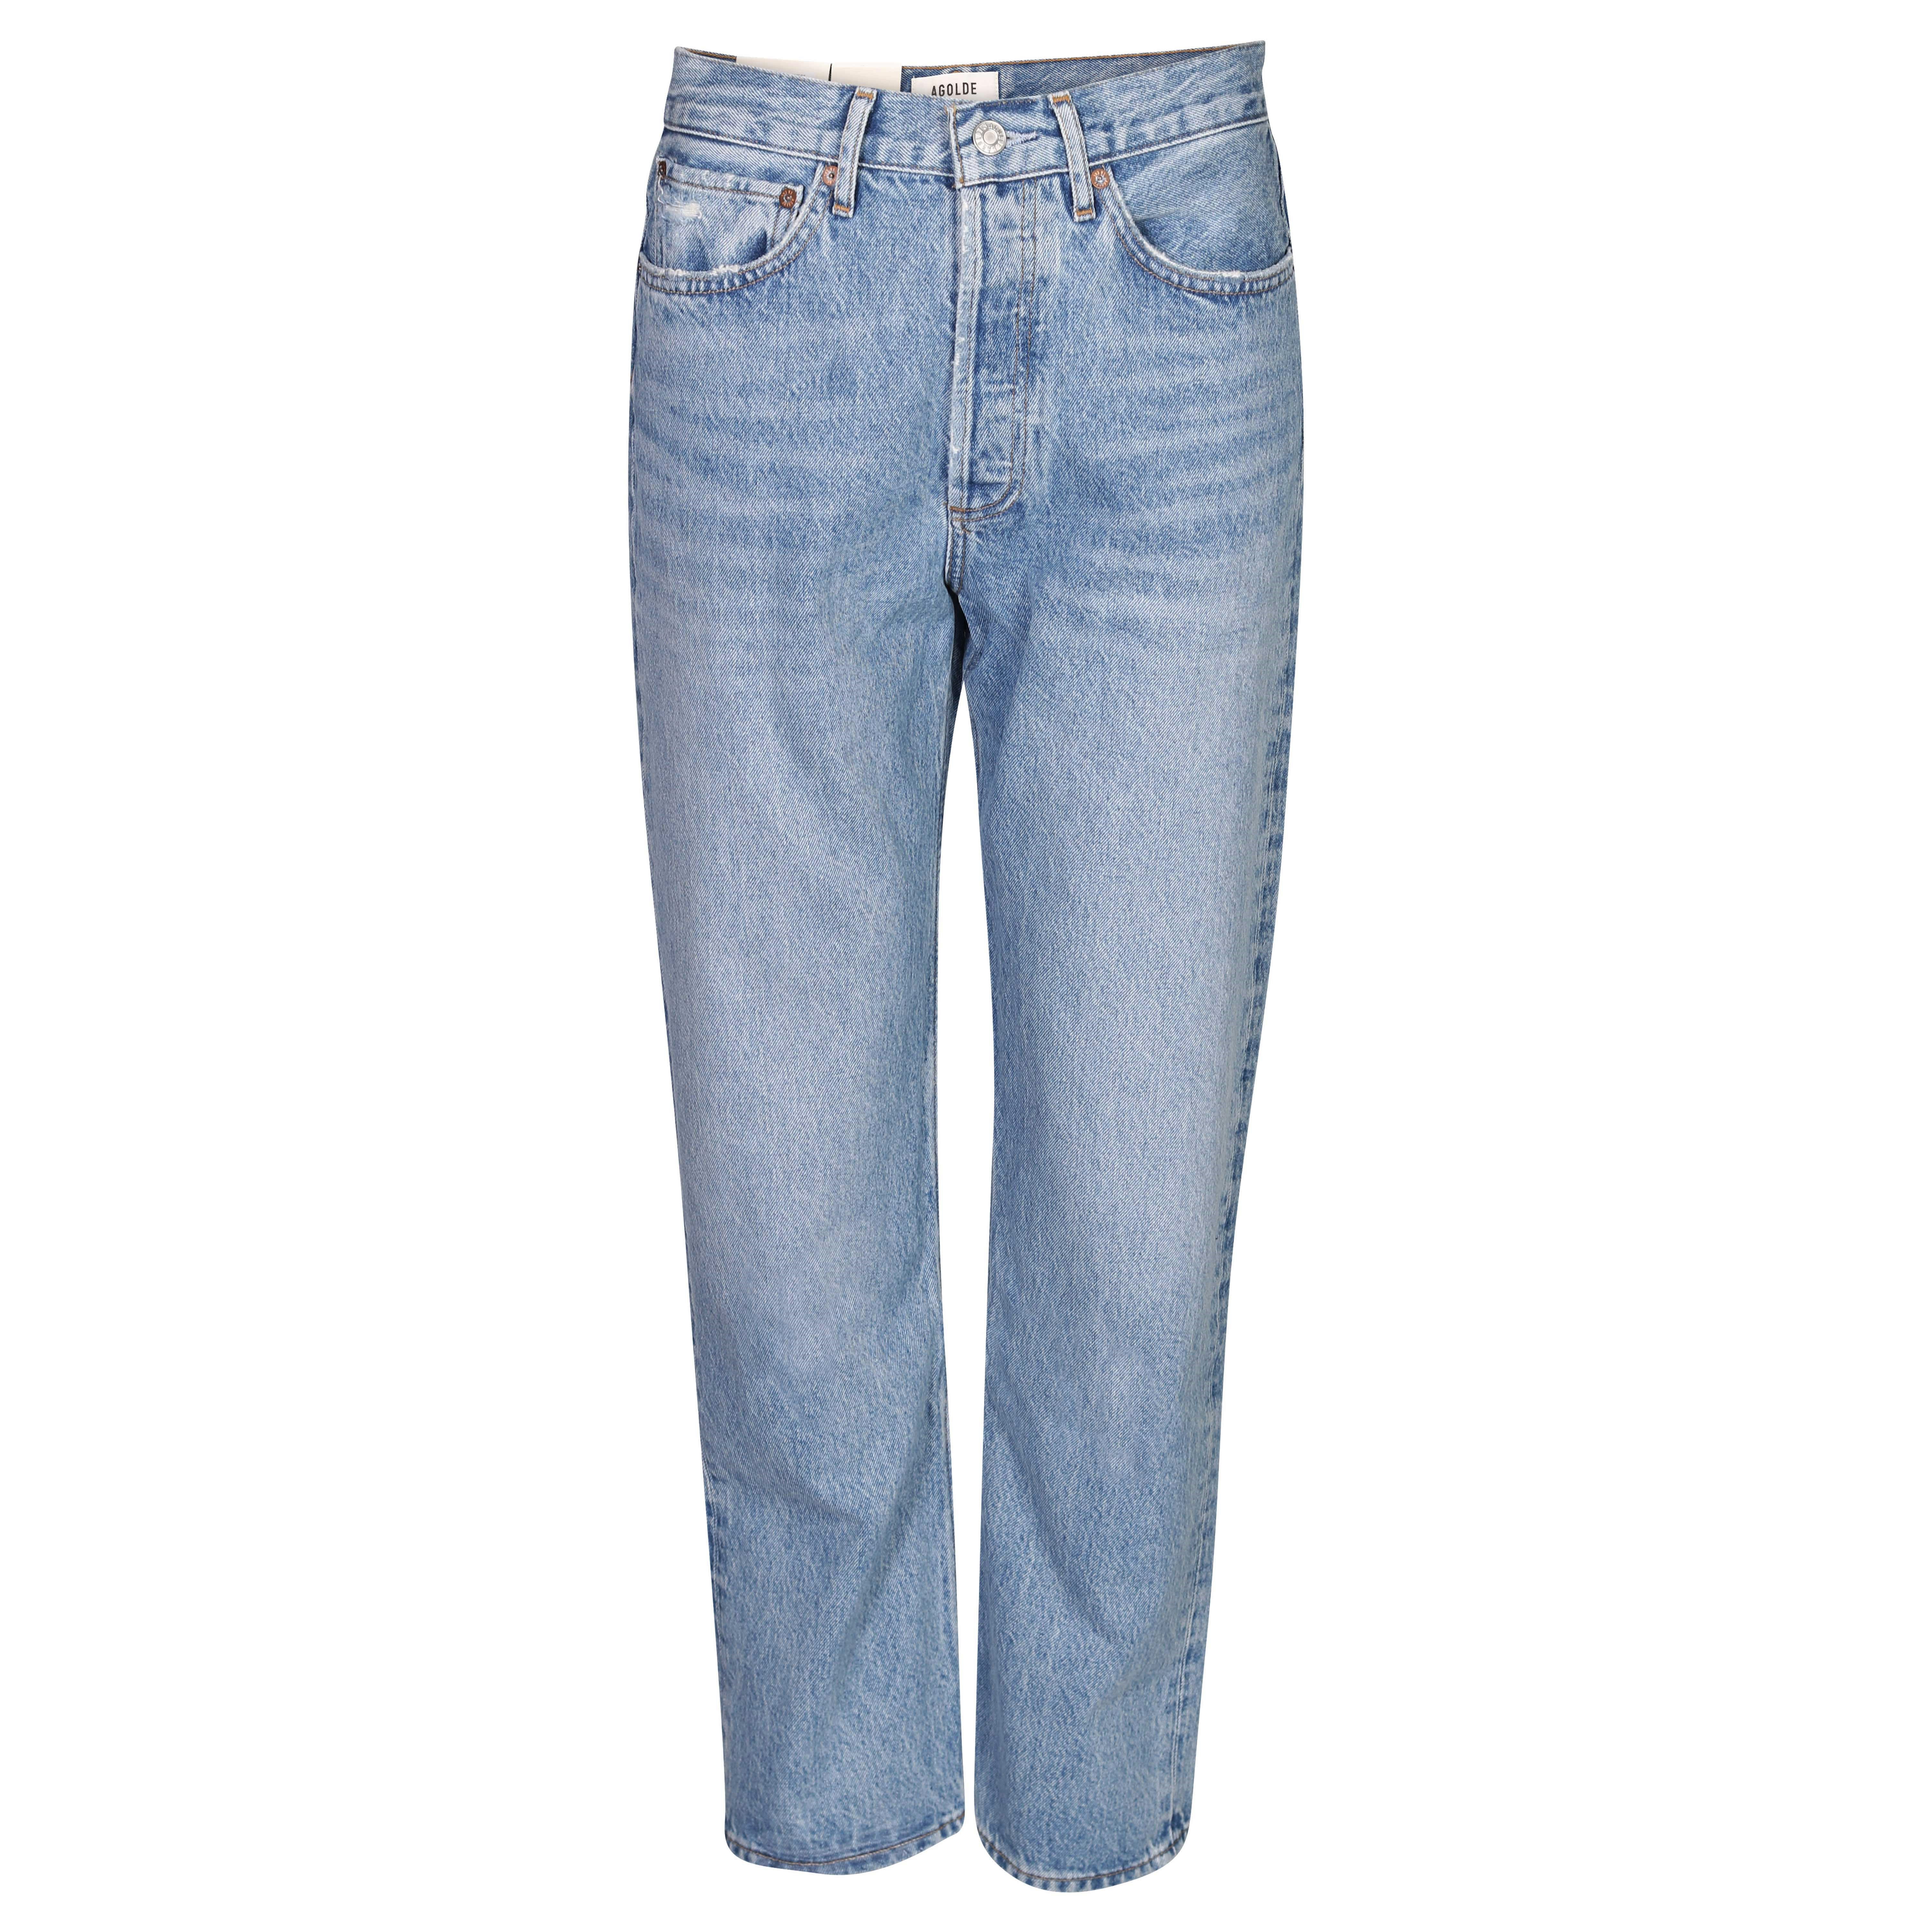 Agolde Jeans 90s Cropped in Scheme Washing W 29